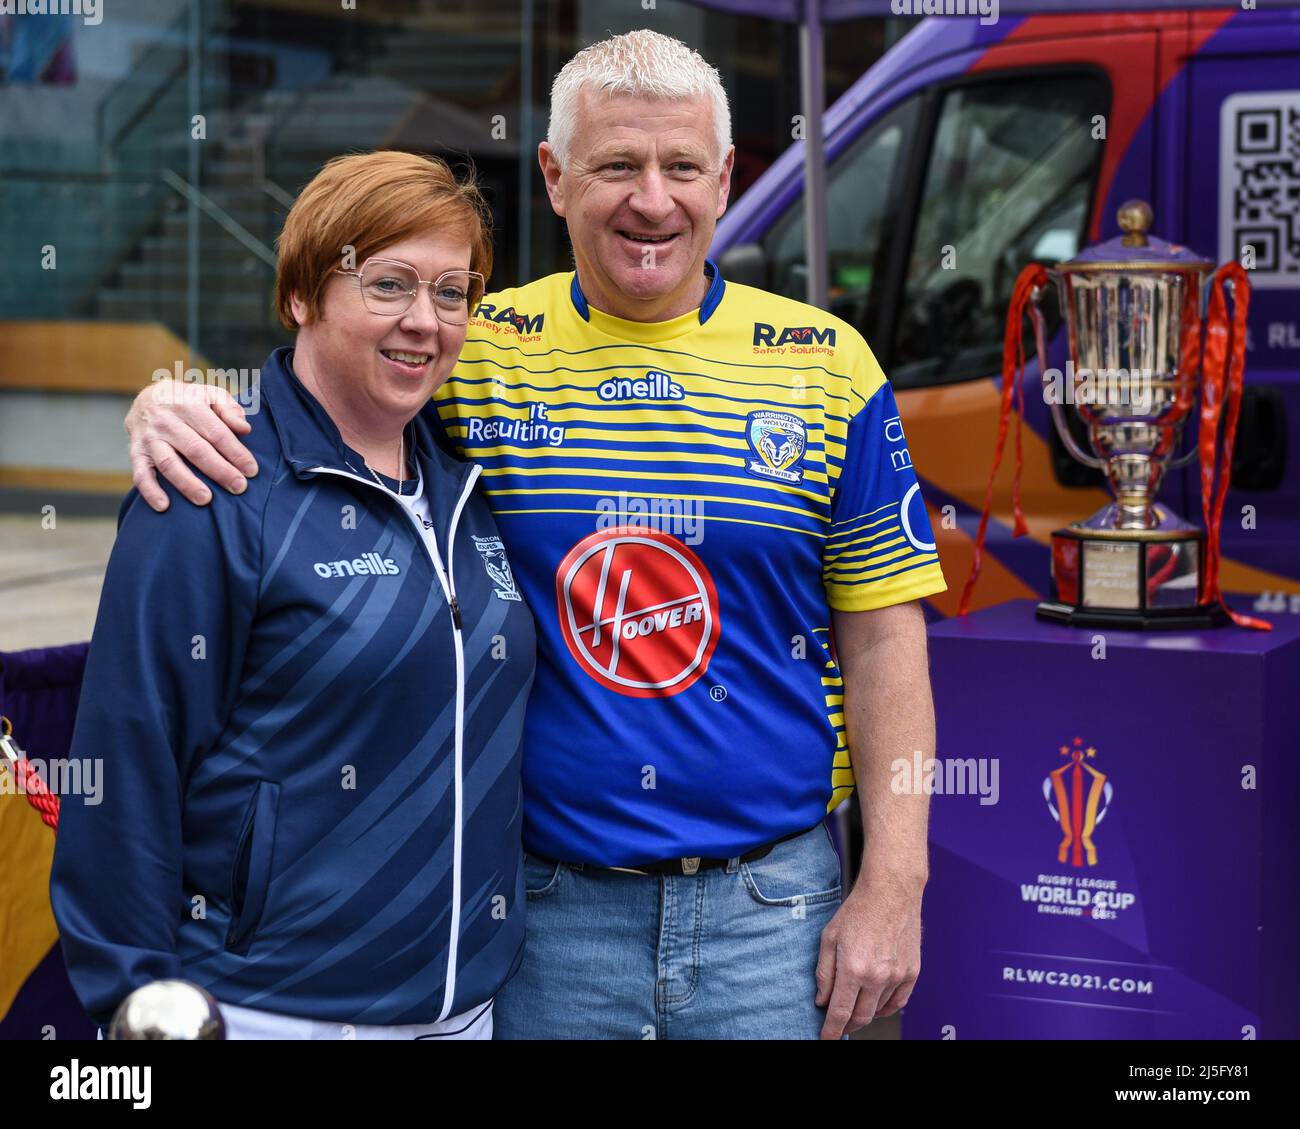 Warrington, UK. 23rd Apr, 2022. Some Warrington Wolves fans pose for photos next to the Rugby League World Cup Trophies in the fan zone before the game in Warrington, United Kingdom on 4/23/2022. (Photo by Simon Whitehead/News Images/Sipa USA) Credit: Sipa USA/Alamy Live News Stock Photo